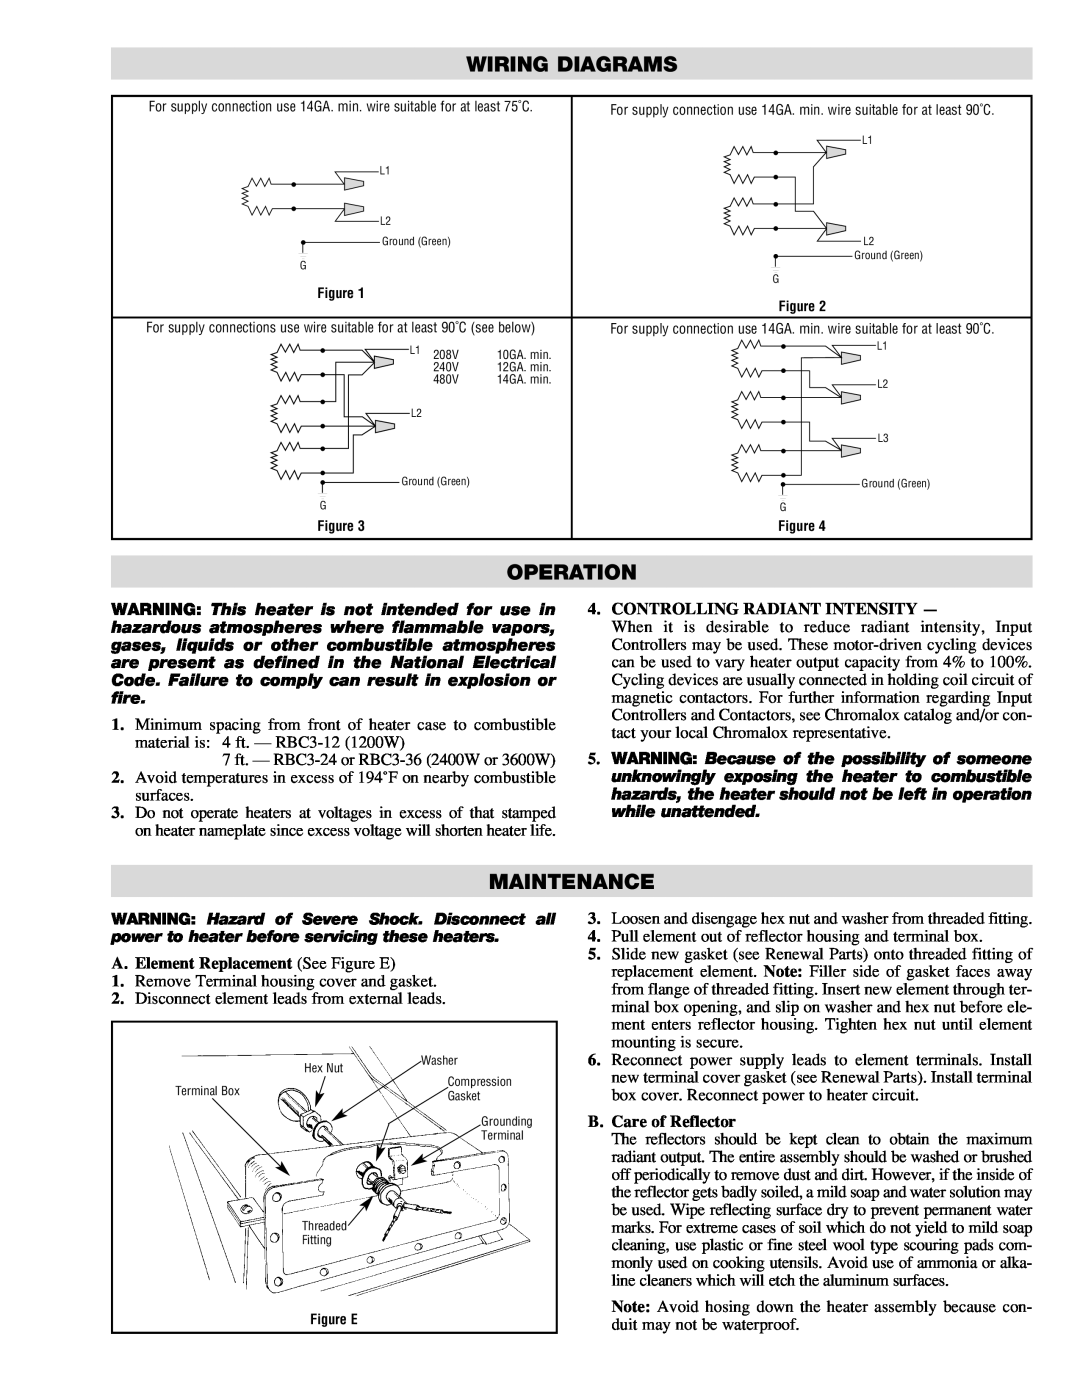 Chromalox PG416-4 manual Wiring Diagrams, Operation, Maintenance, Controlling Radiant Intensity, B.Care of Reflector 